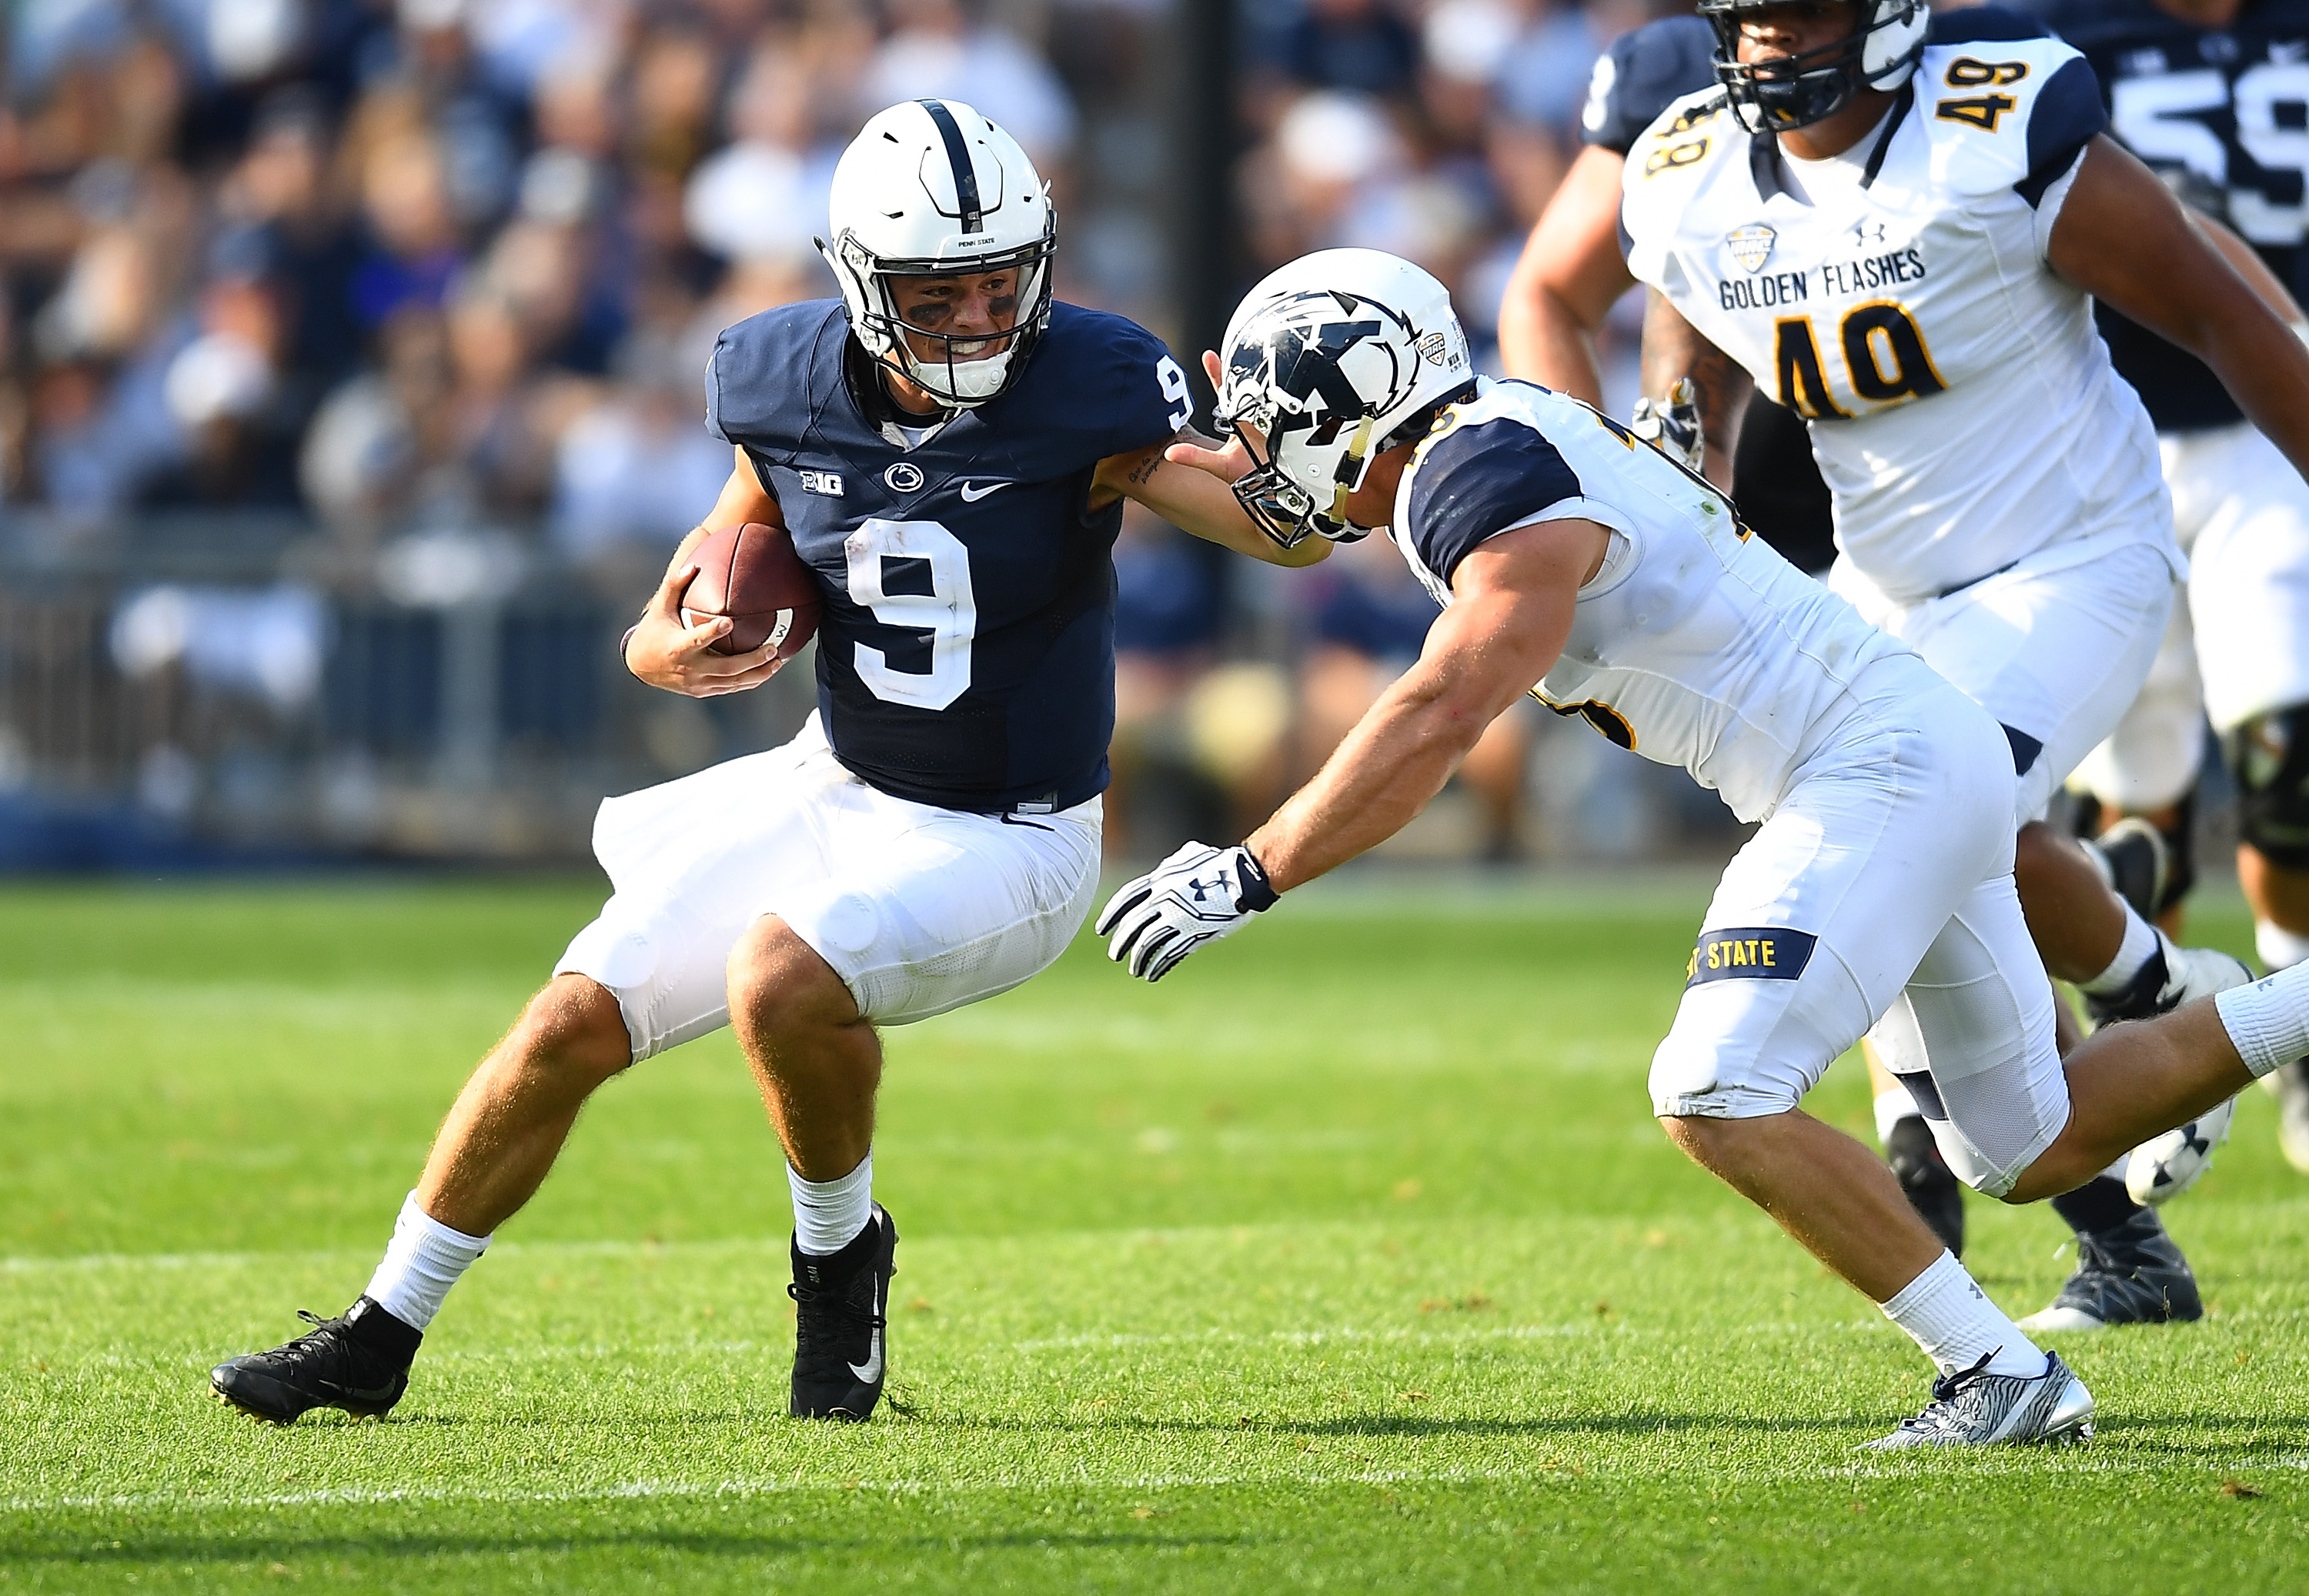 Kent State DB Nate Holley tries to tackle Penn State QB Trace McSorley, September 3, 2016.